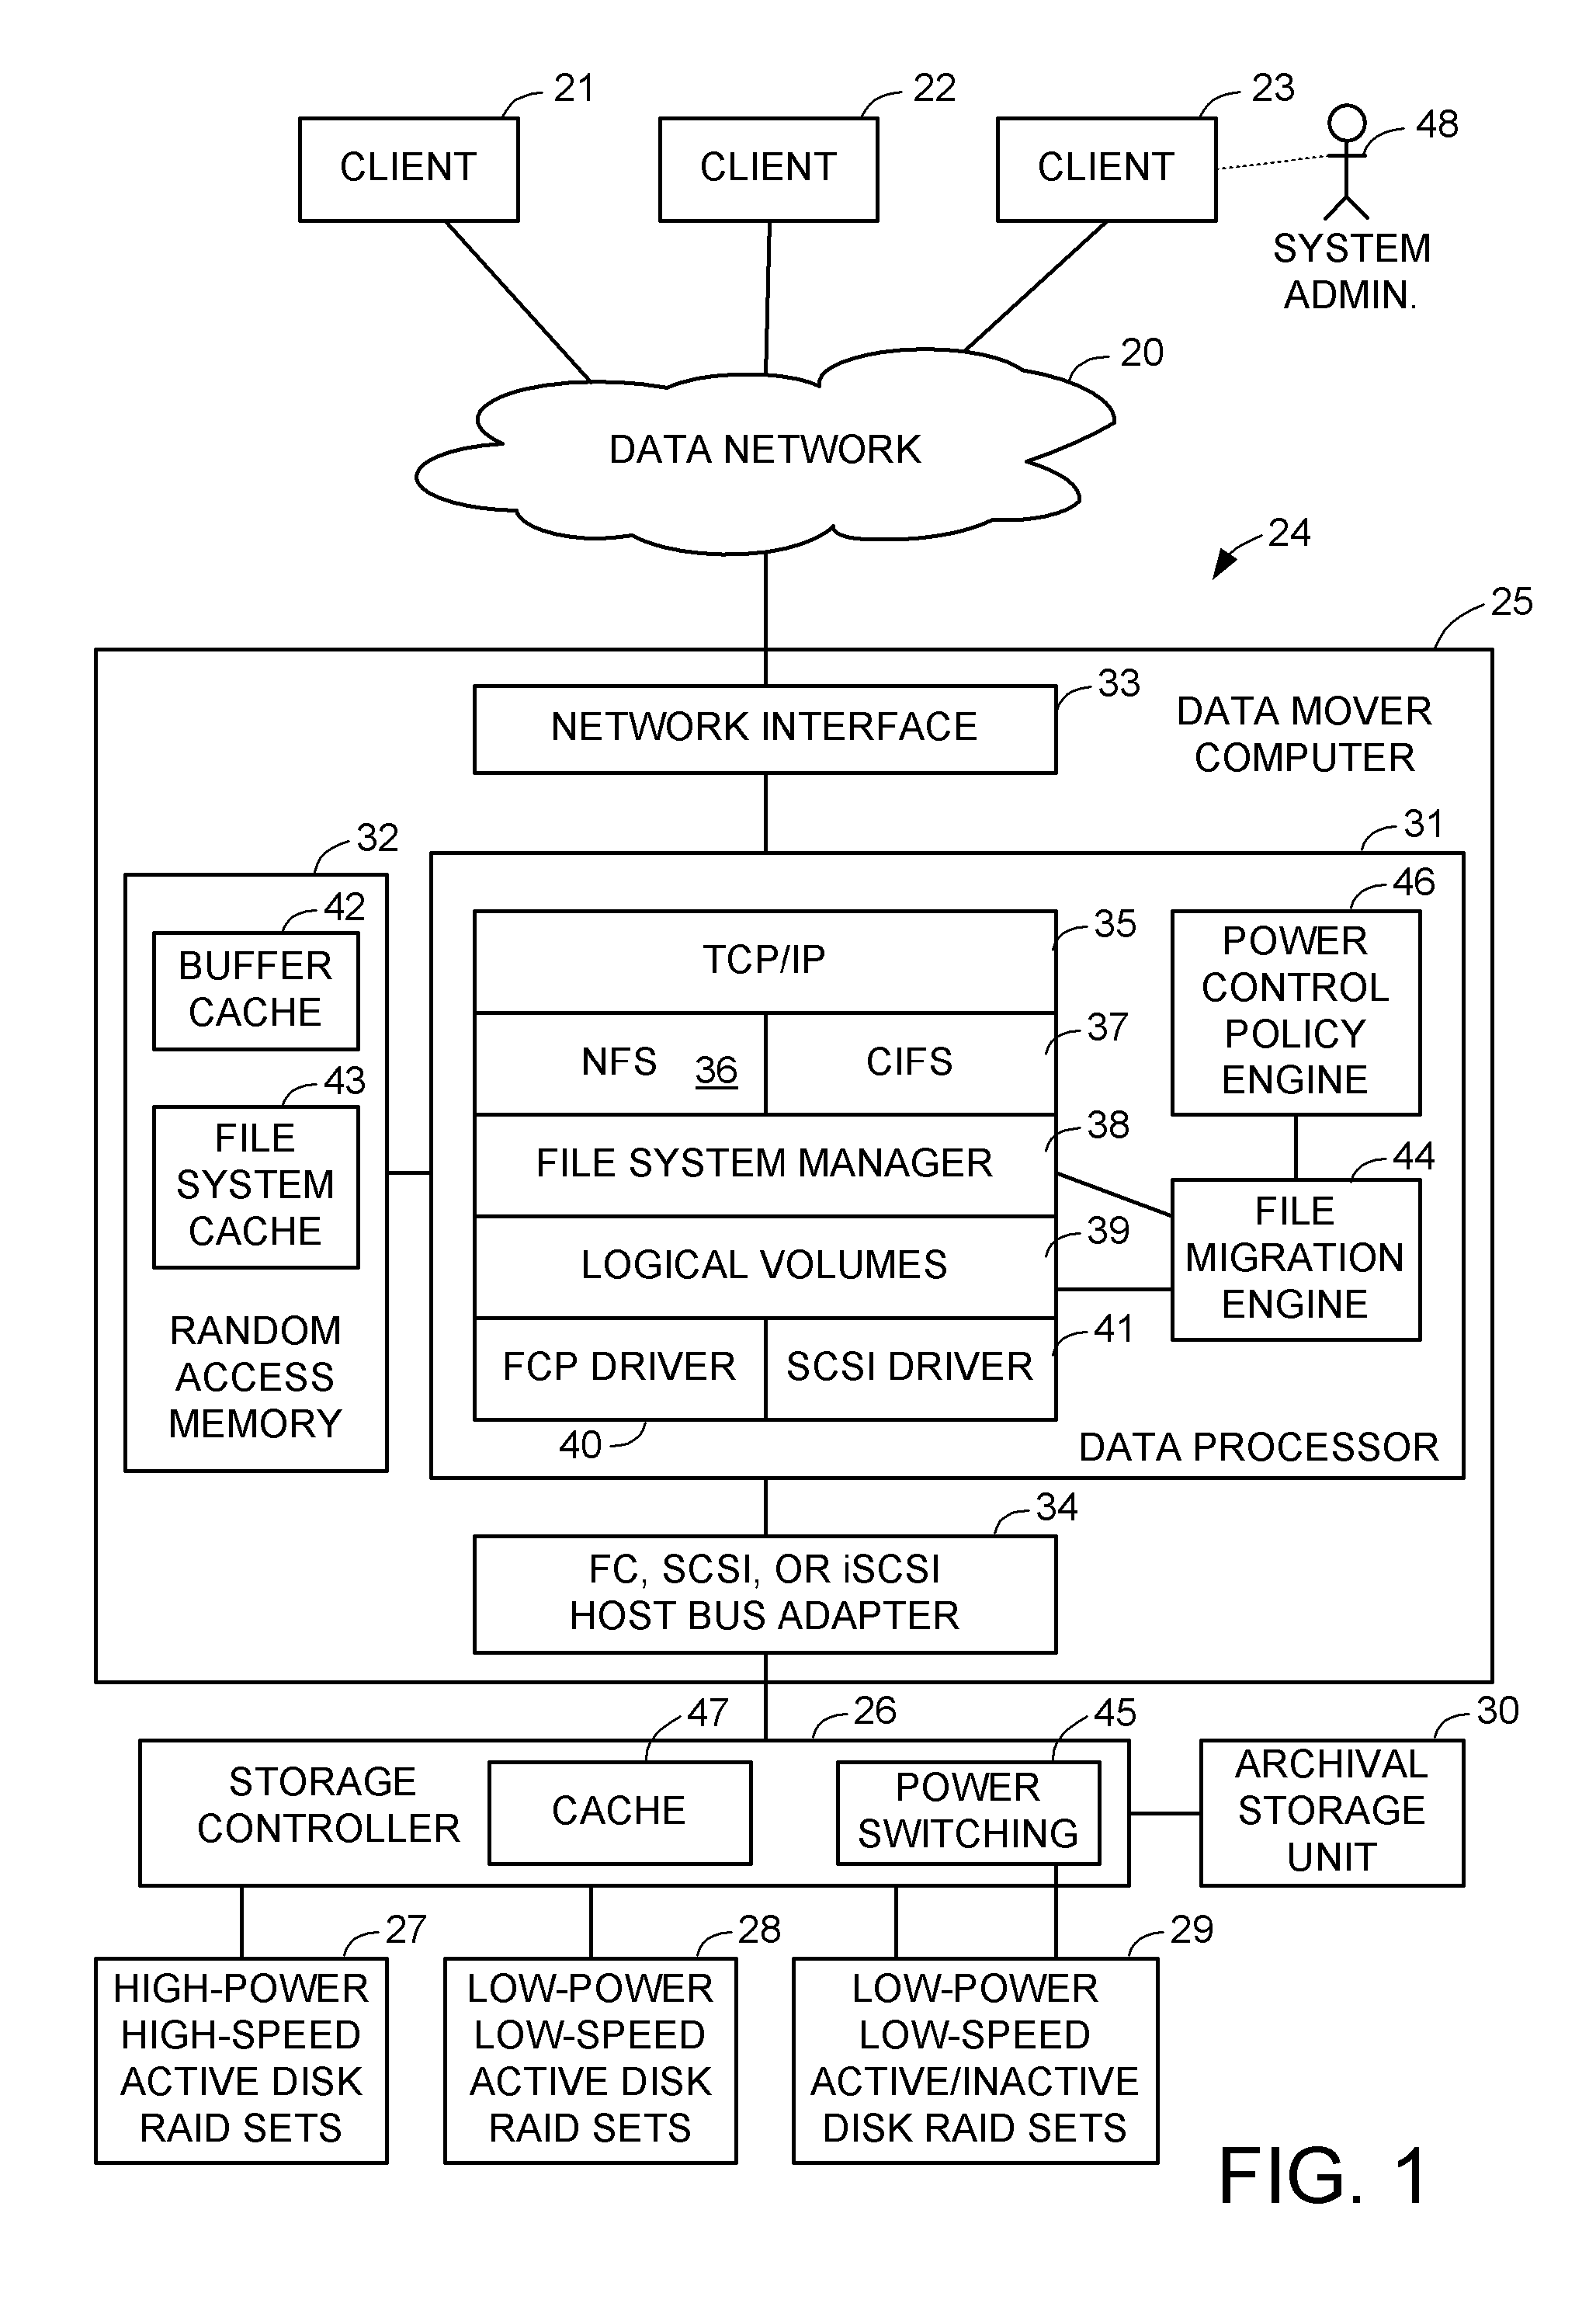 Intelligent file system based power management for shared storage that migrates groups of files based on inactivity threshold